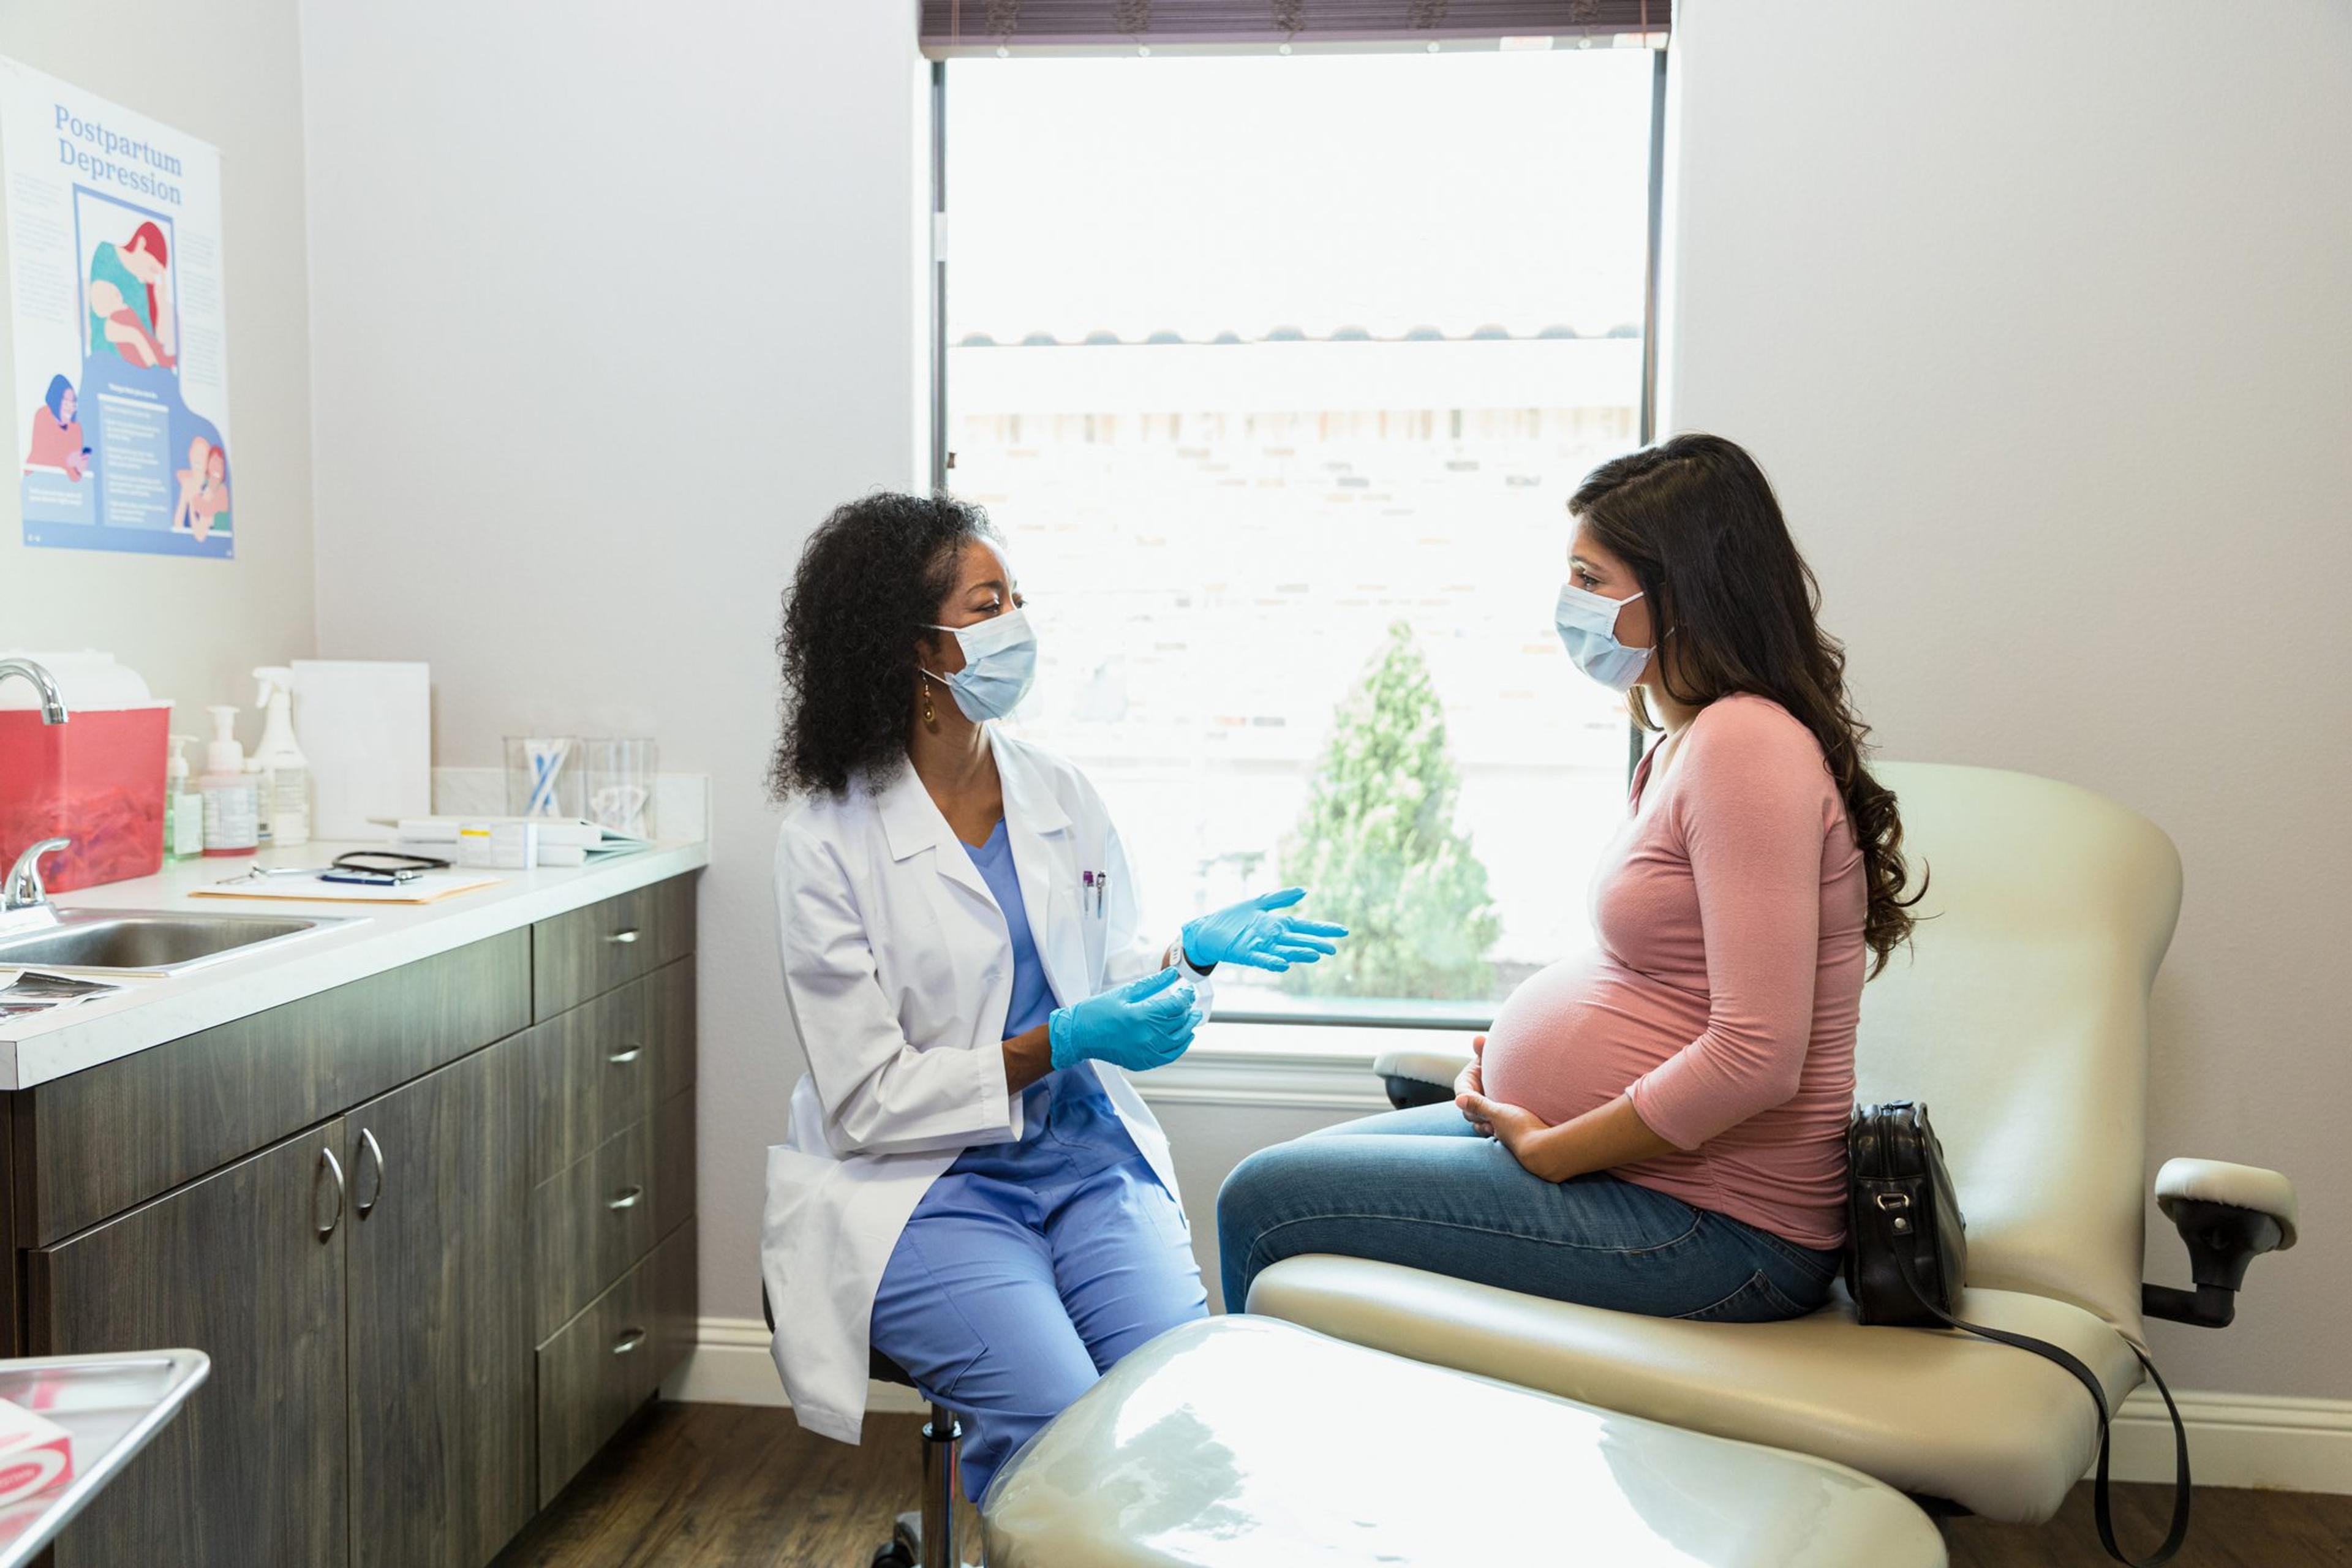 Health insurance is a critical component to preparing for the birth of a child. It provides access to prenatal care, which can help prevent complications during pregnancy.